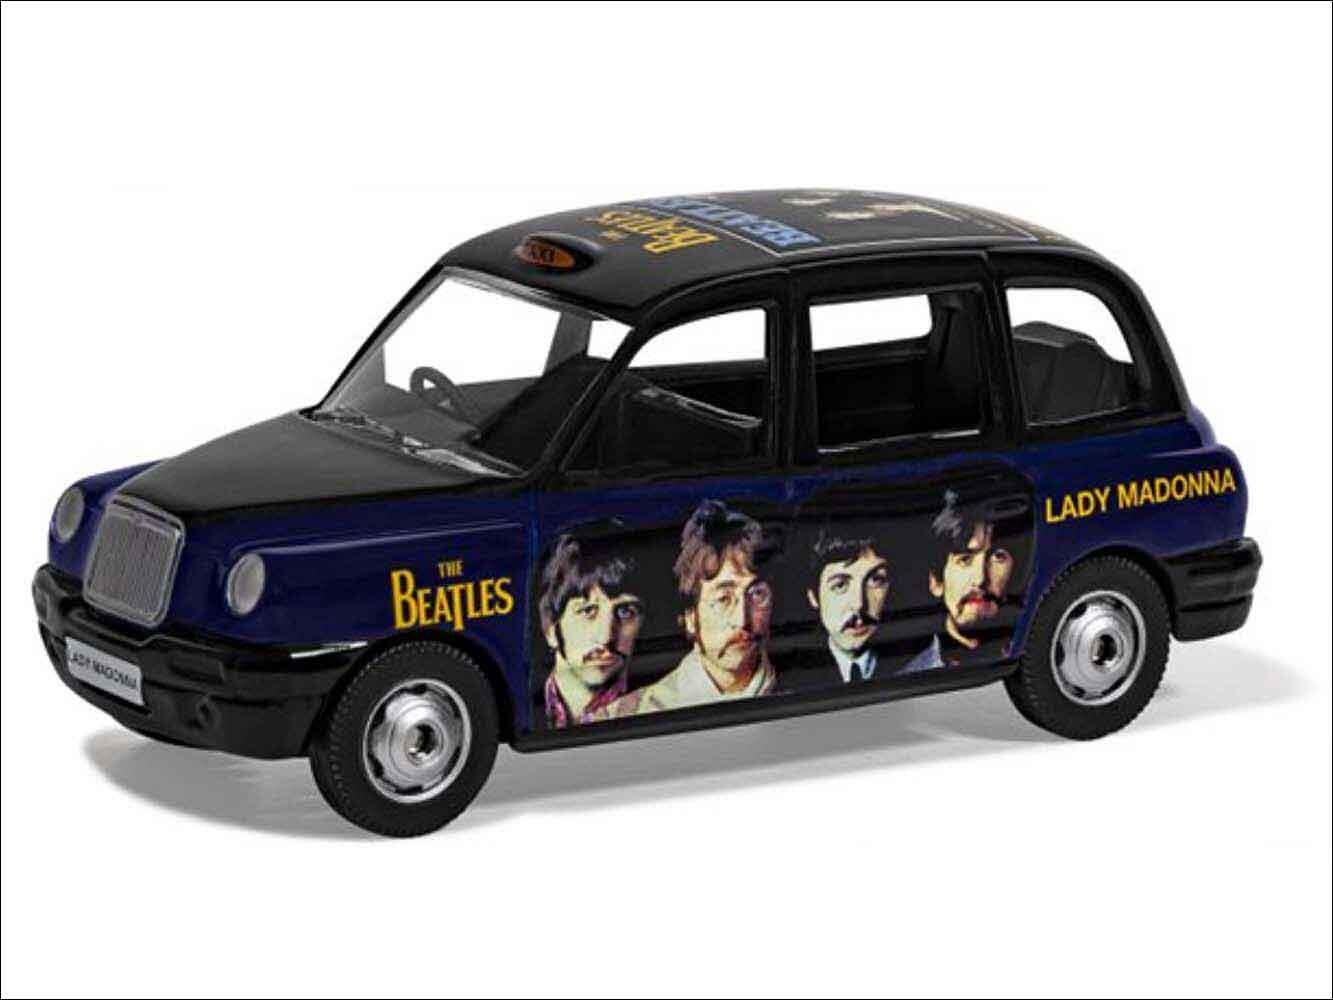 The Beatles London Taxi Lady Madonna